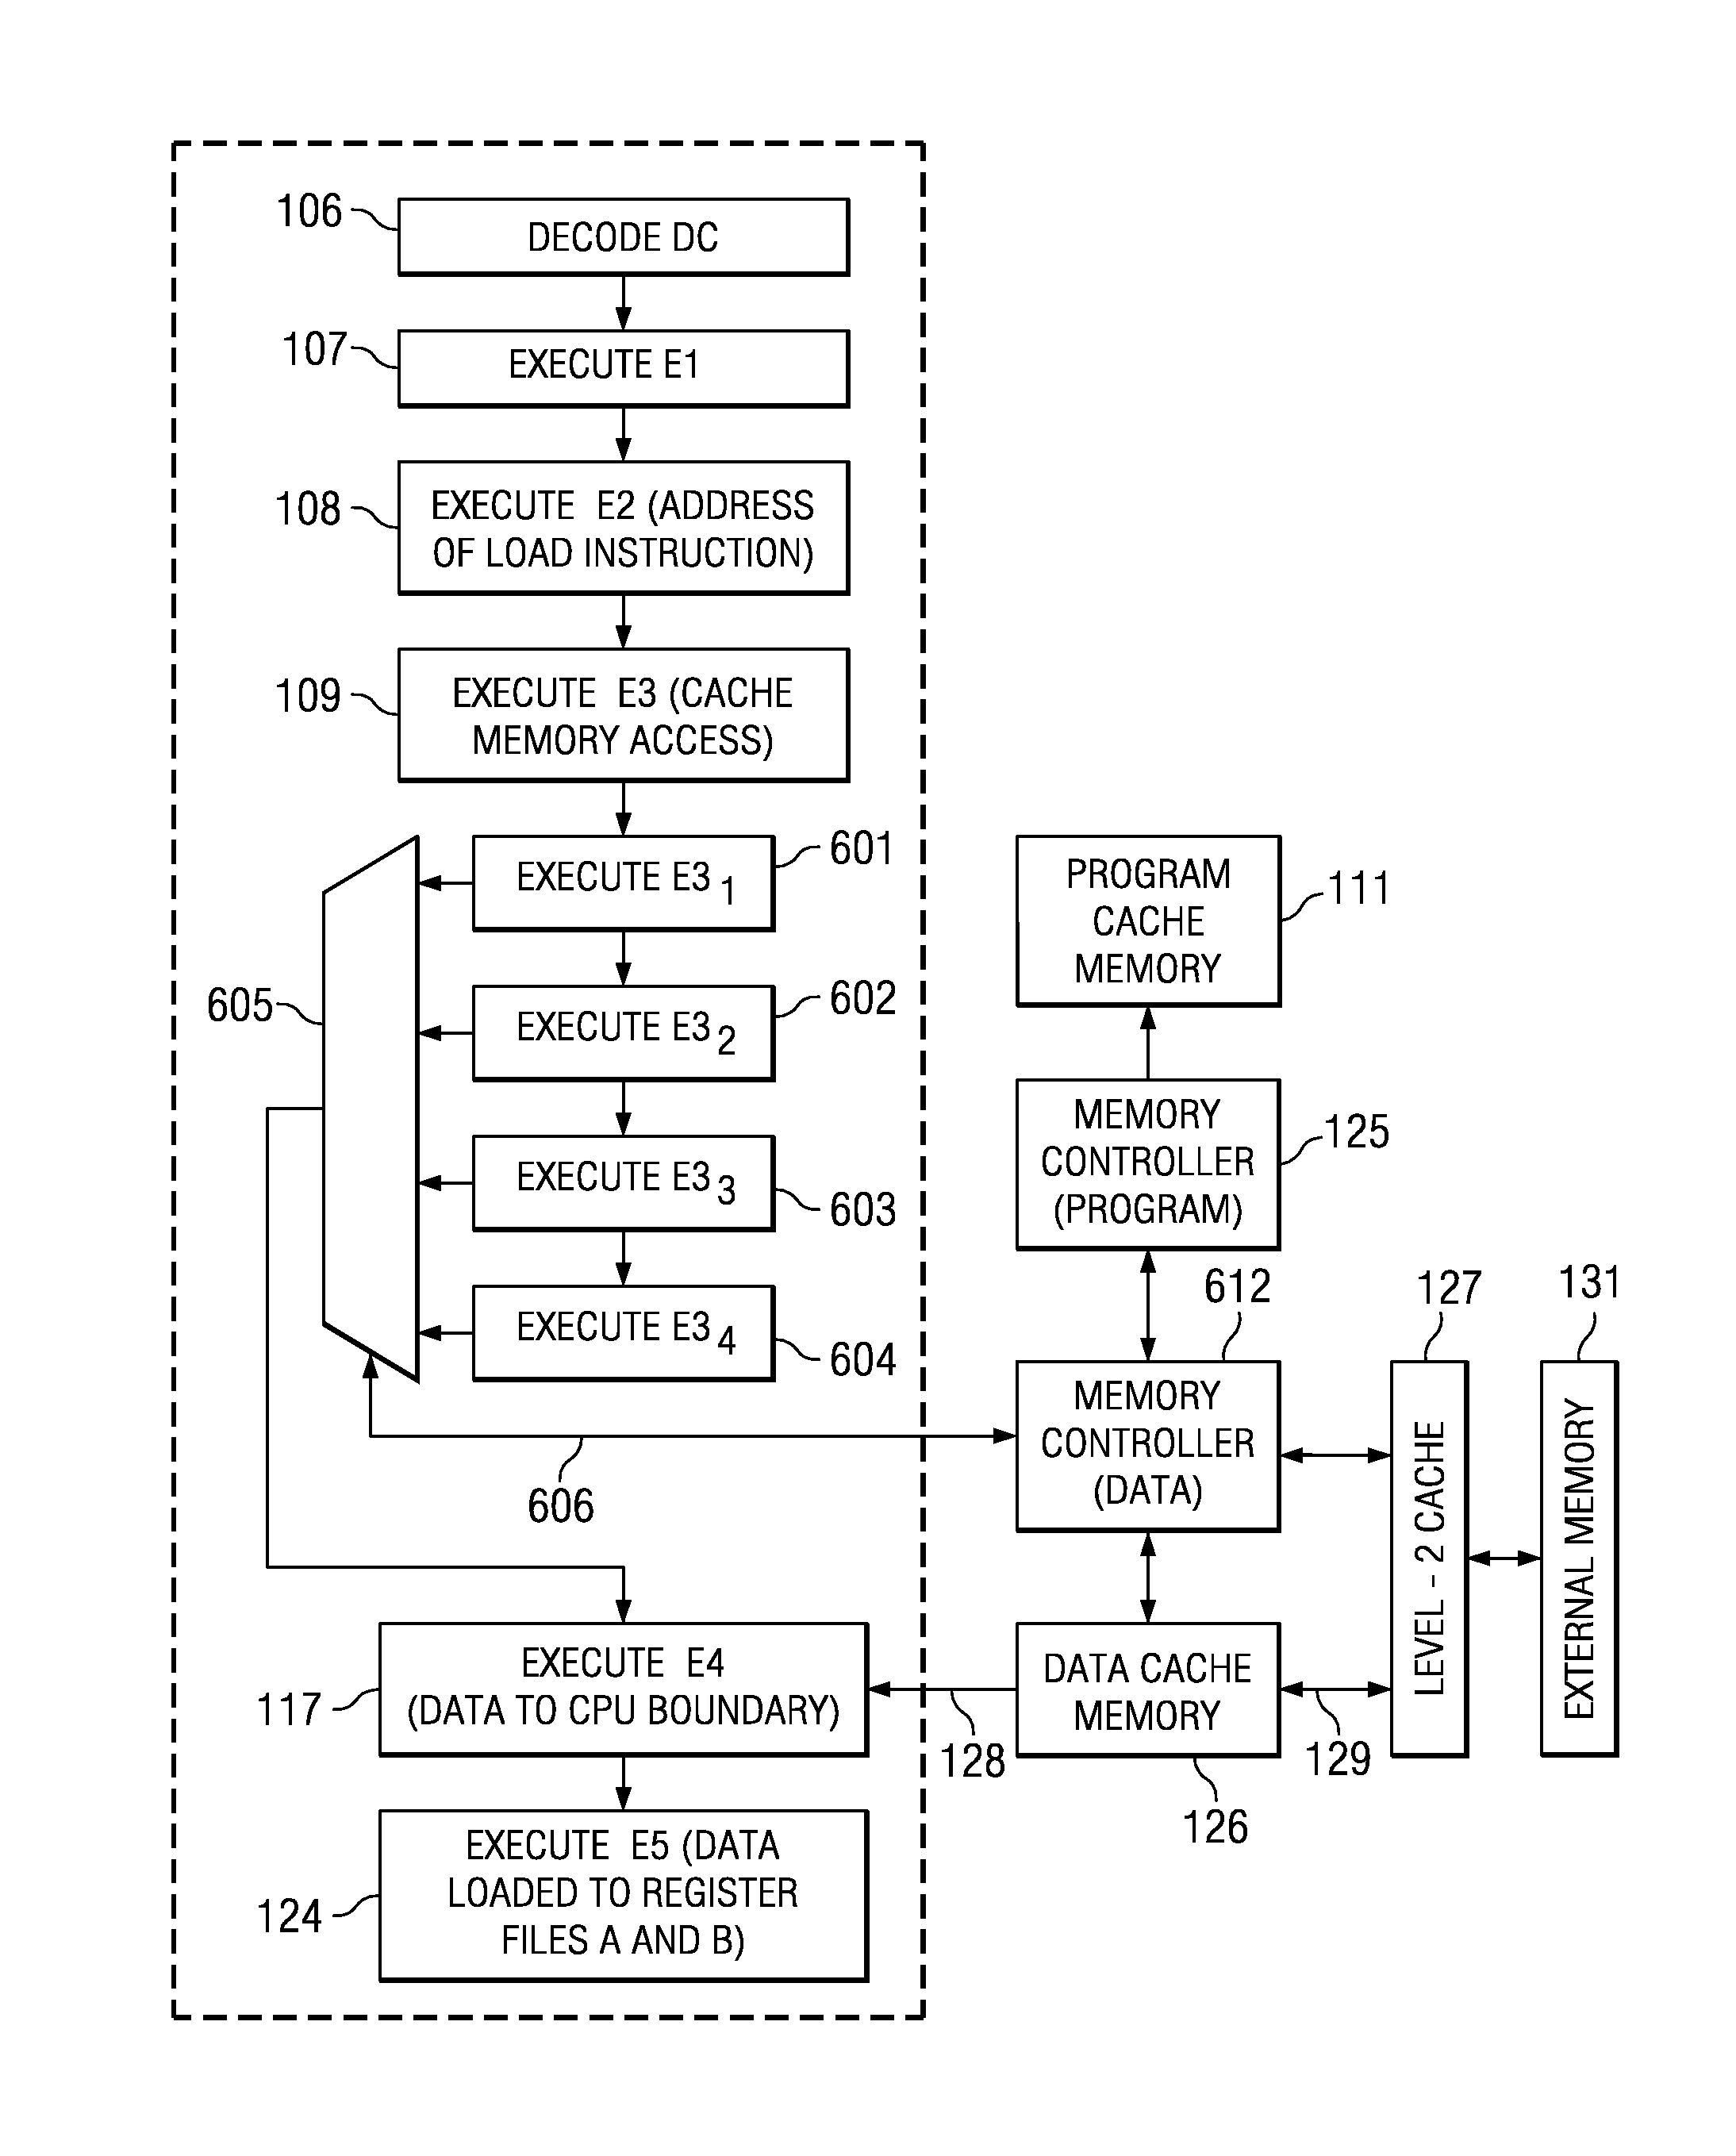 Stall-free pipelined cache for statically scheduled and dispatched execution